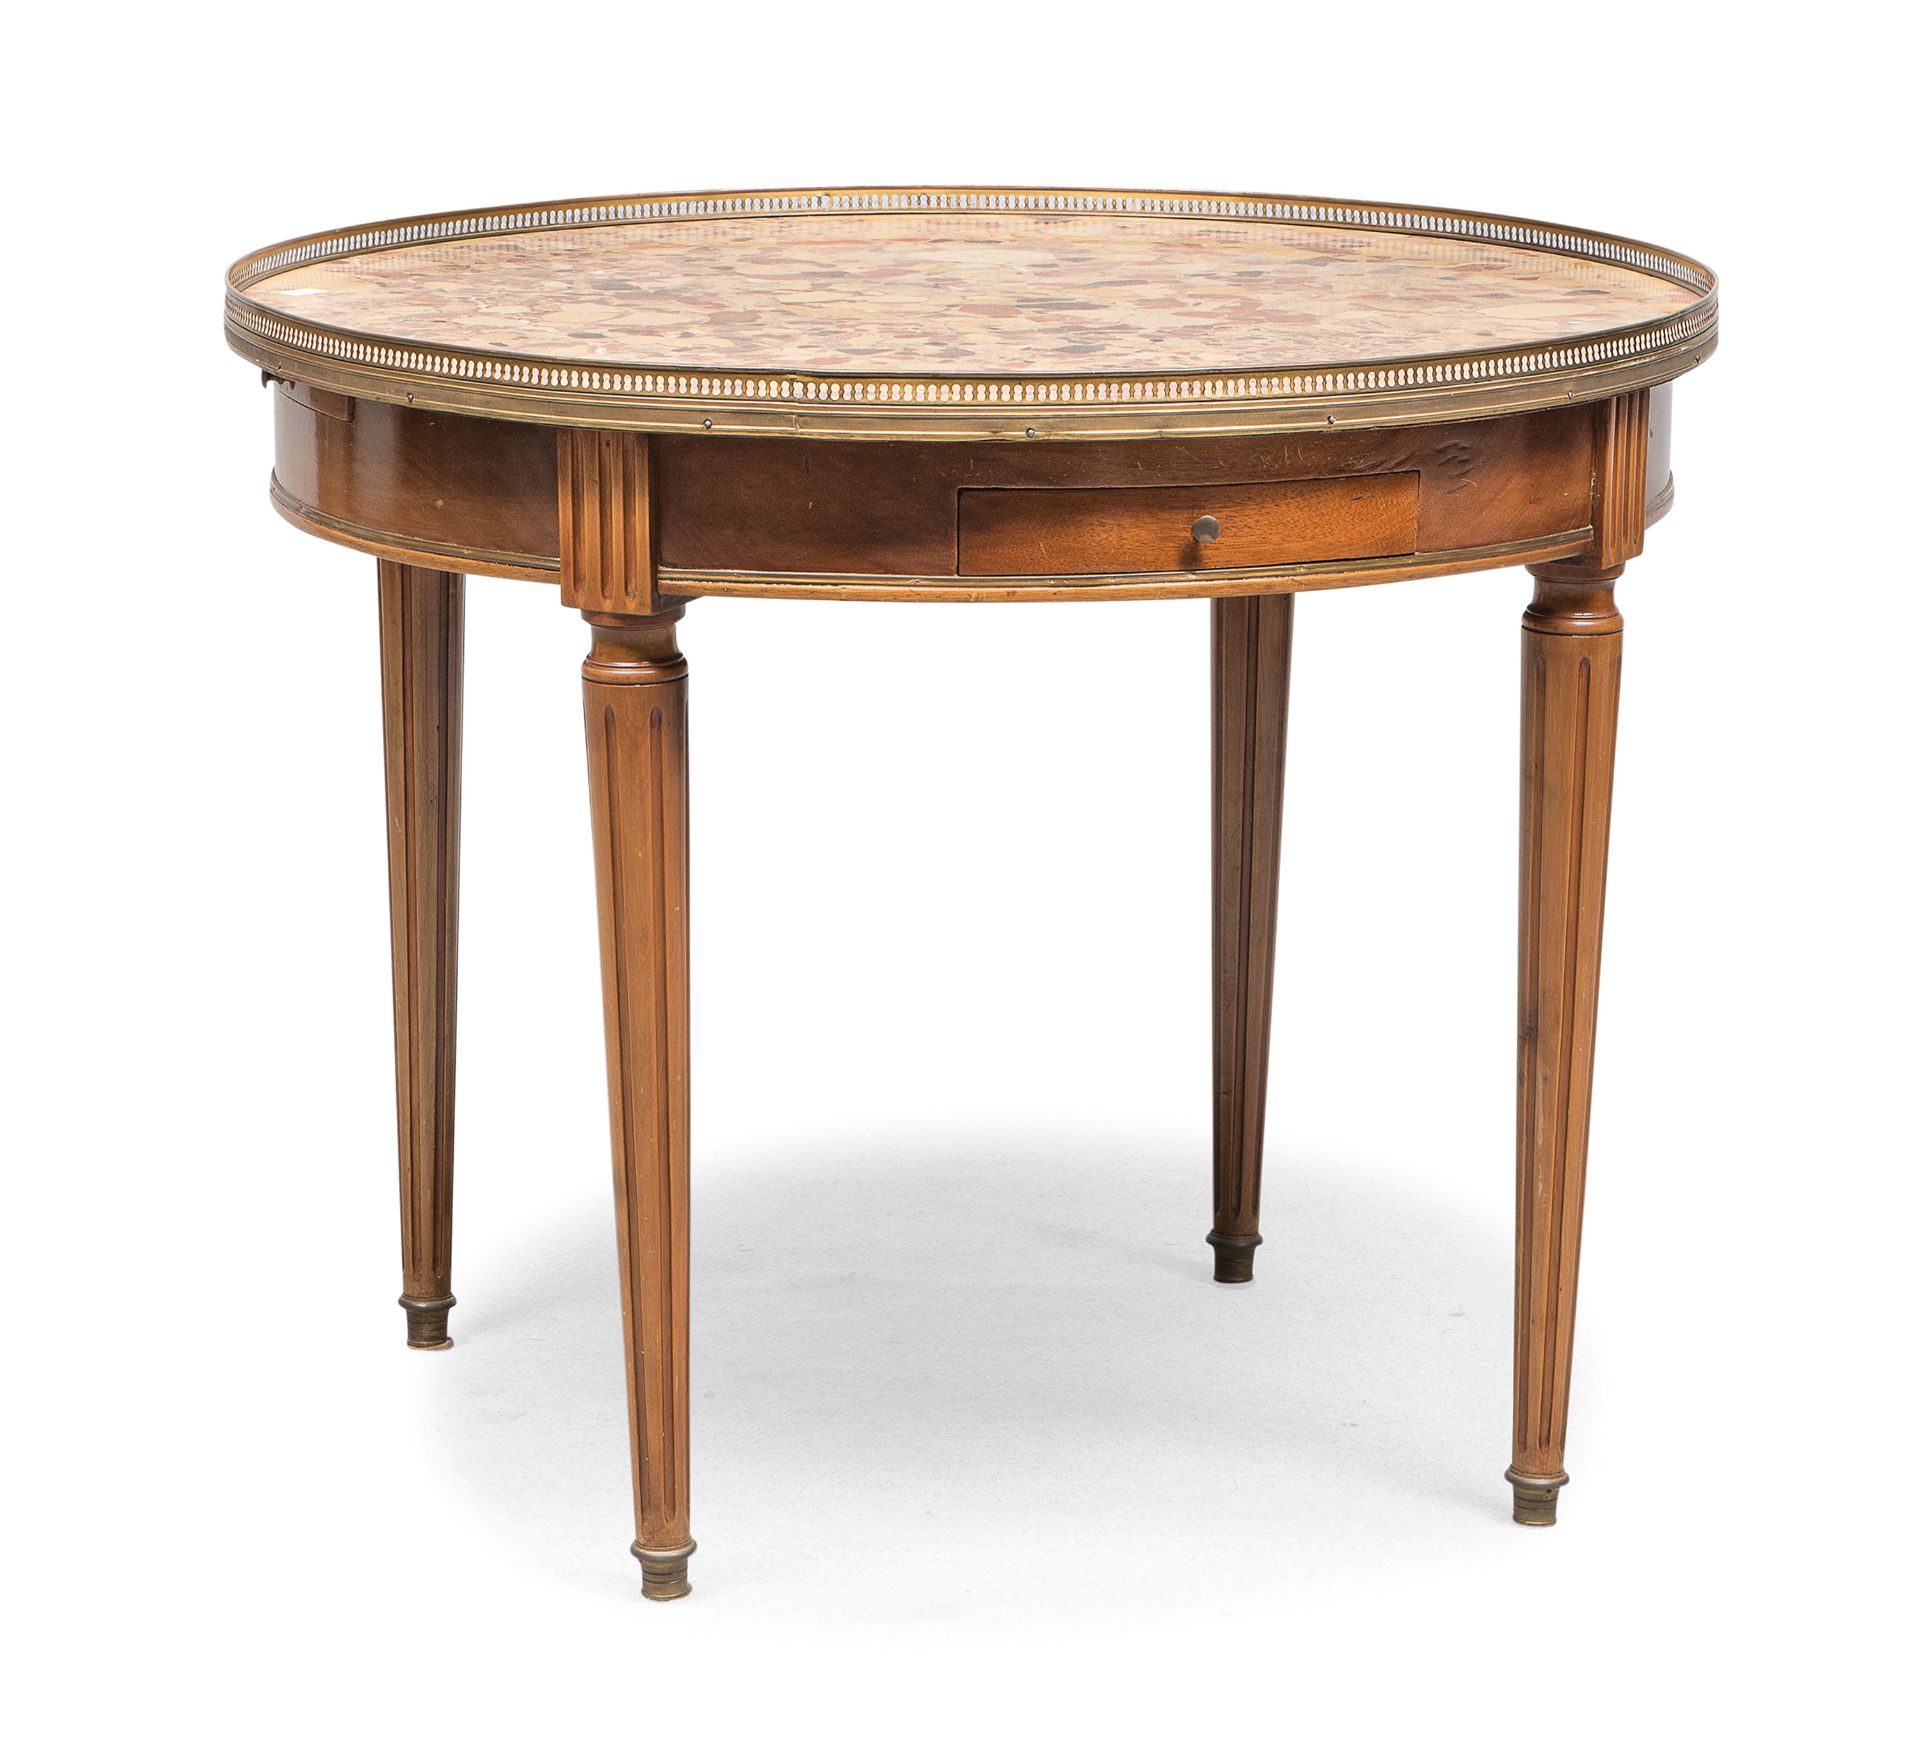 ROUND TABOURET TABLE IN WALNUT FRANCE EARLY 19th CENTURY